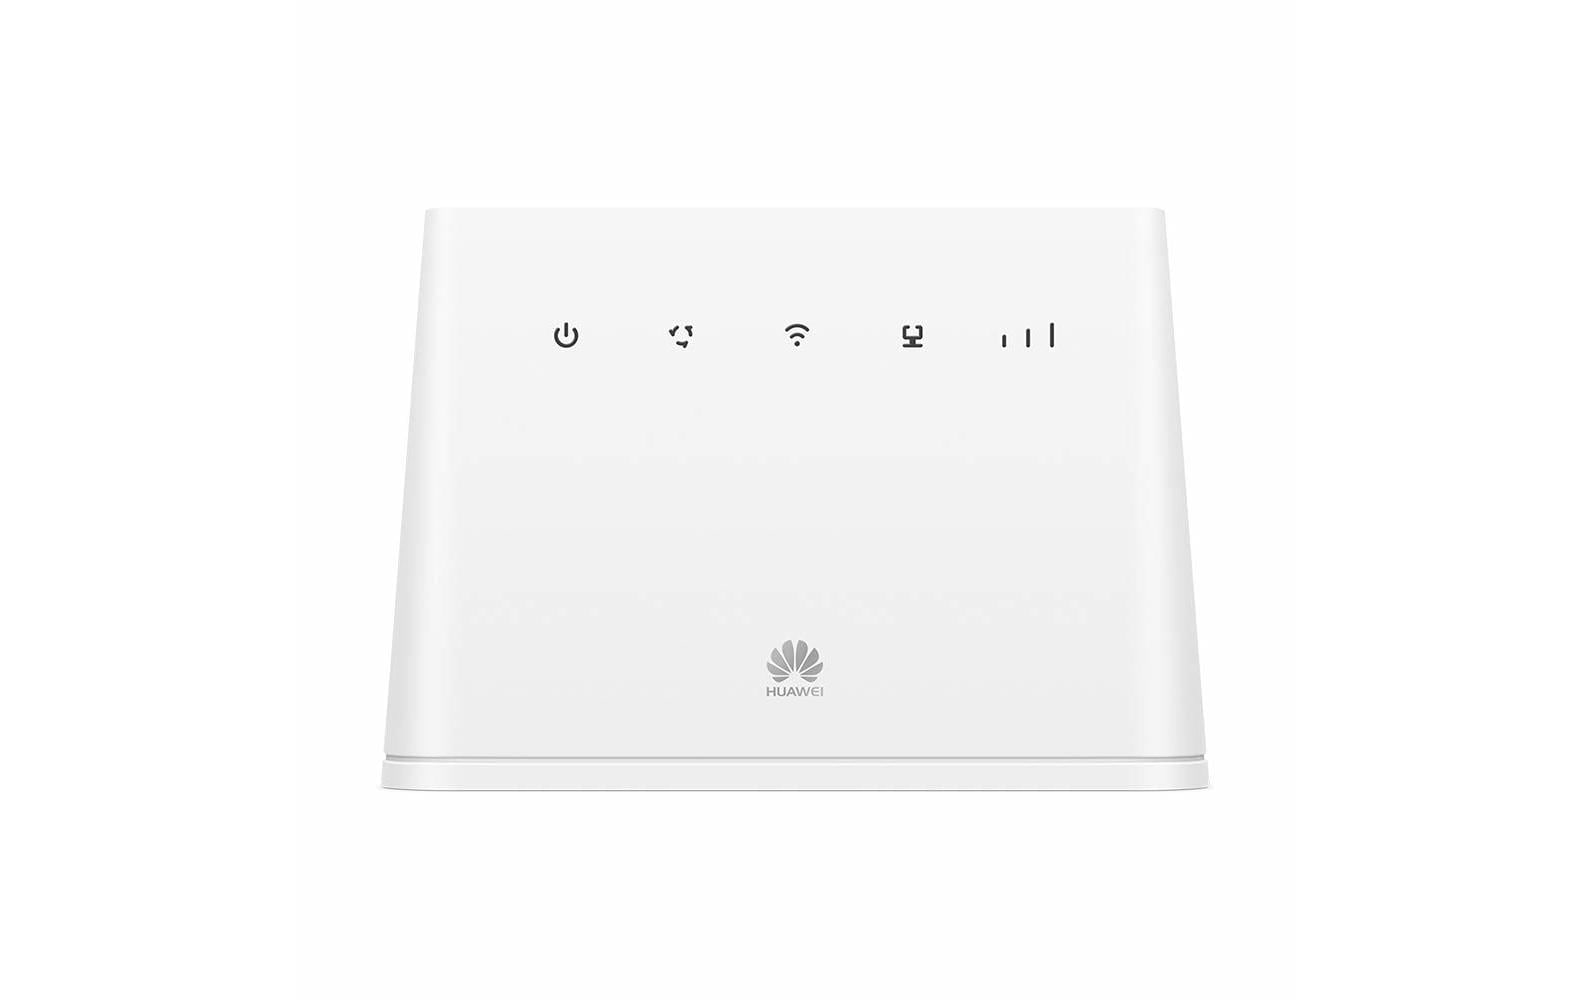 Huawei 4G/LTE-Router »B311-221«